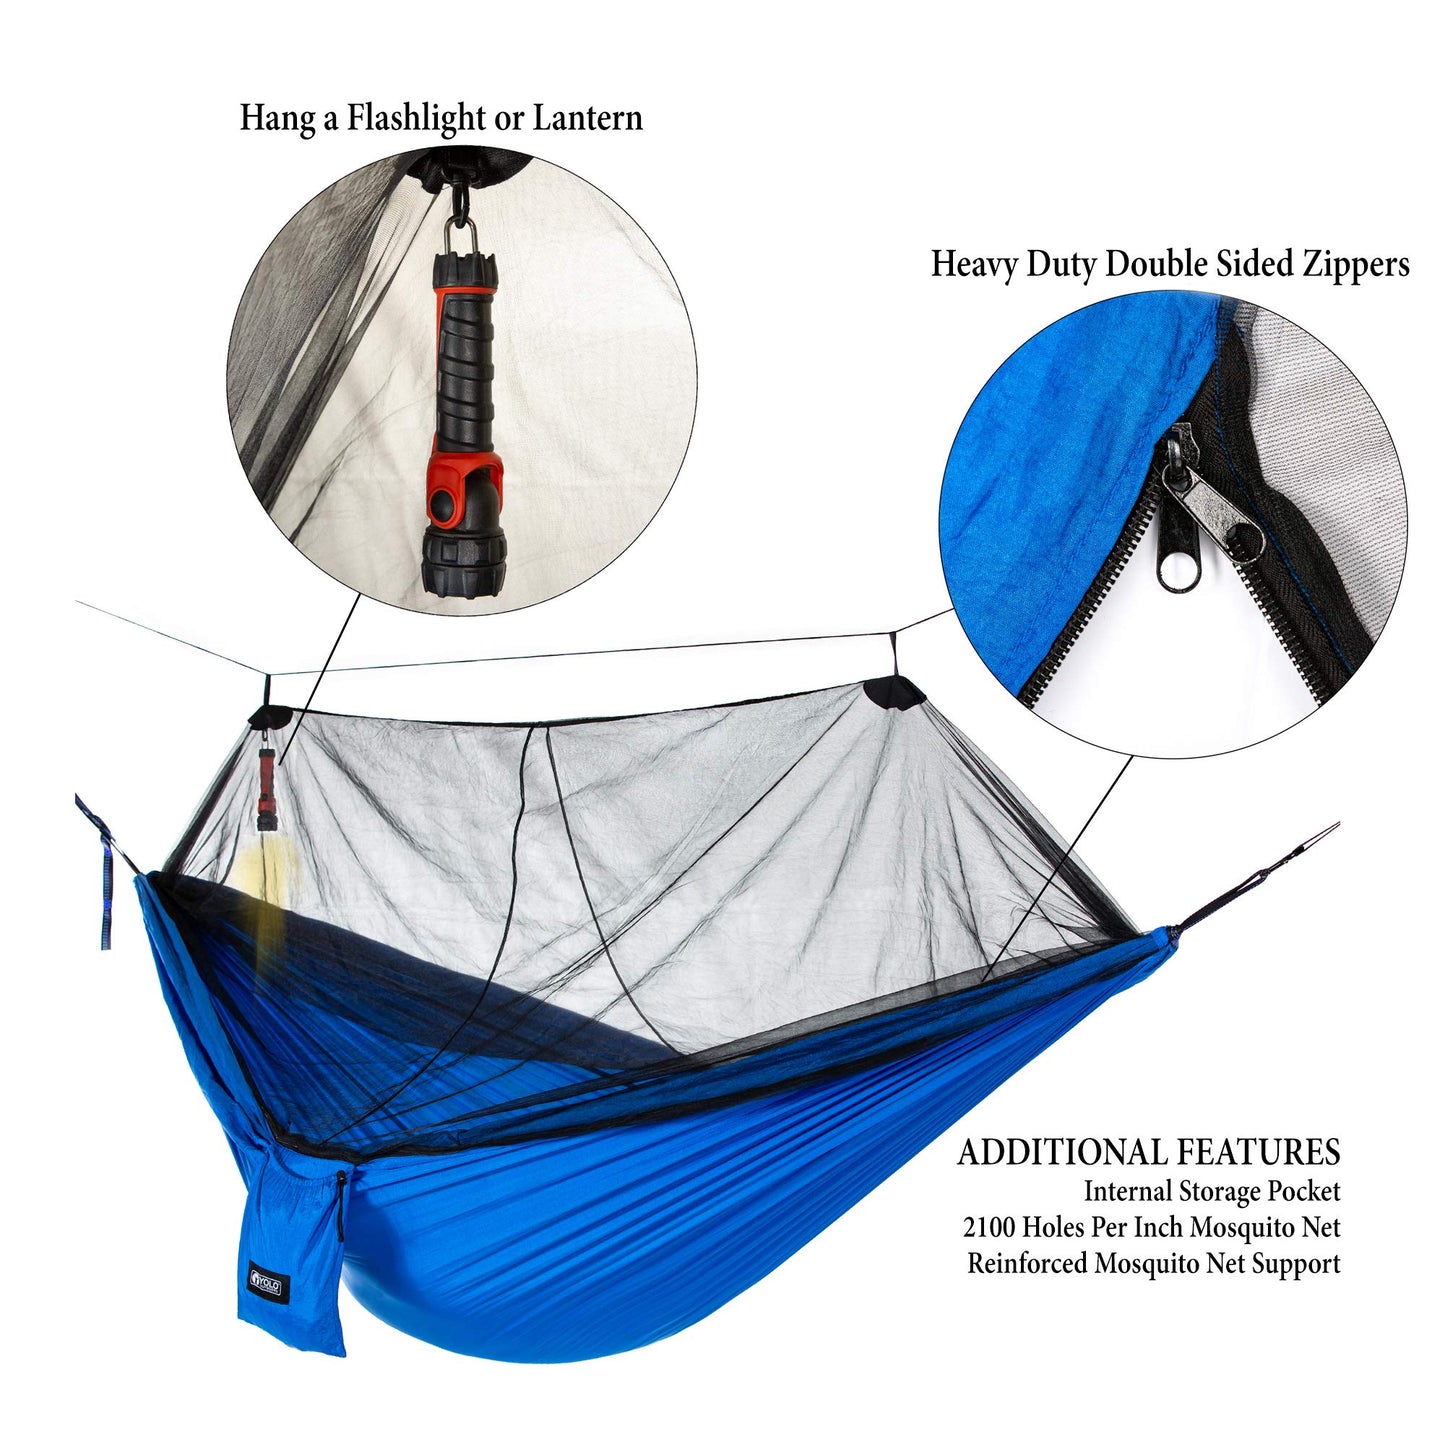 Camping Hammock with Mosquito Net - YOLO Outdoors